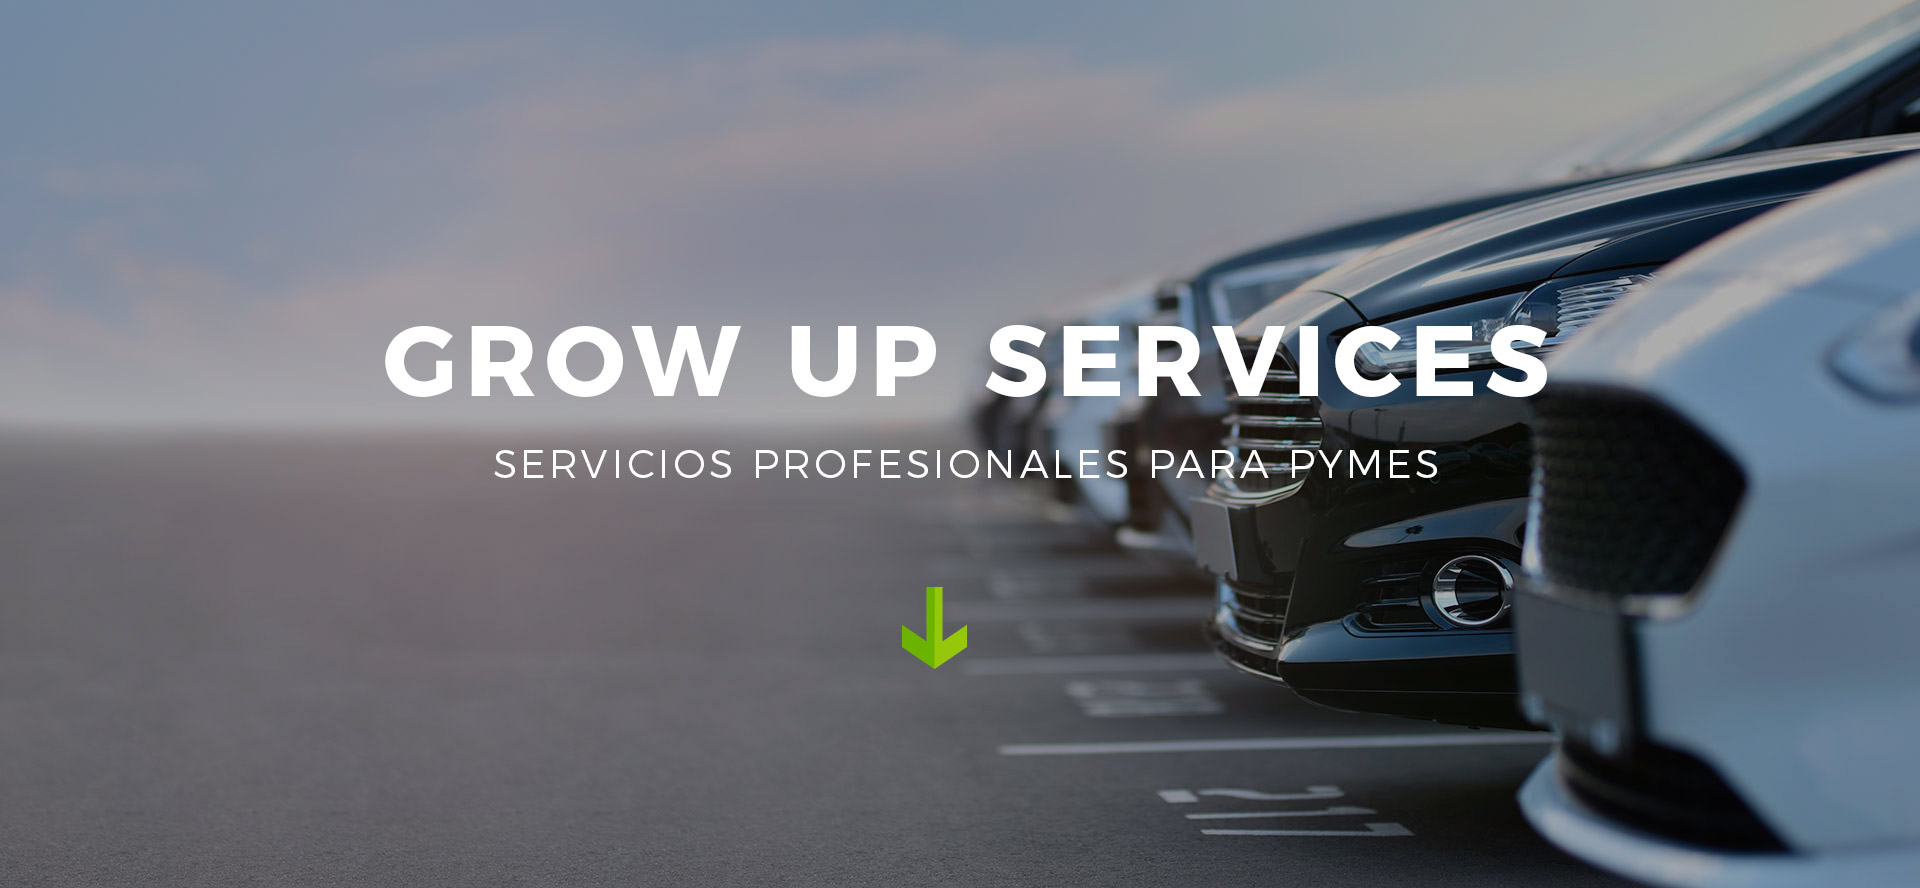 BANNER-WEB-GROW-UP-SERVICES